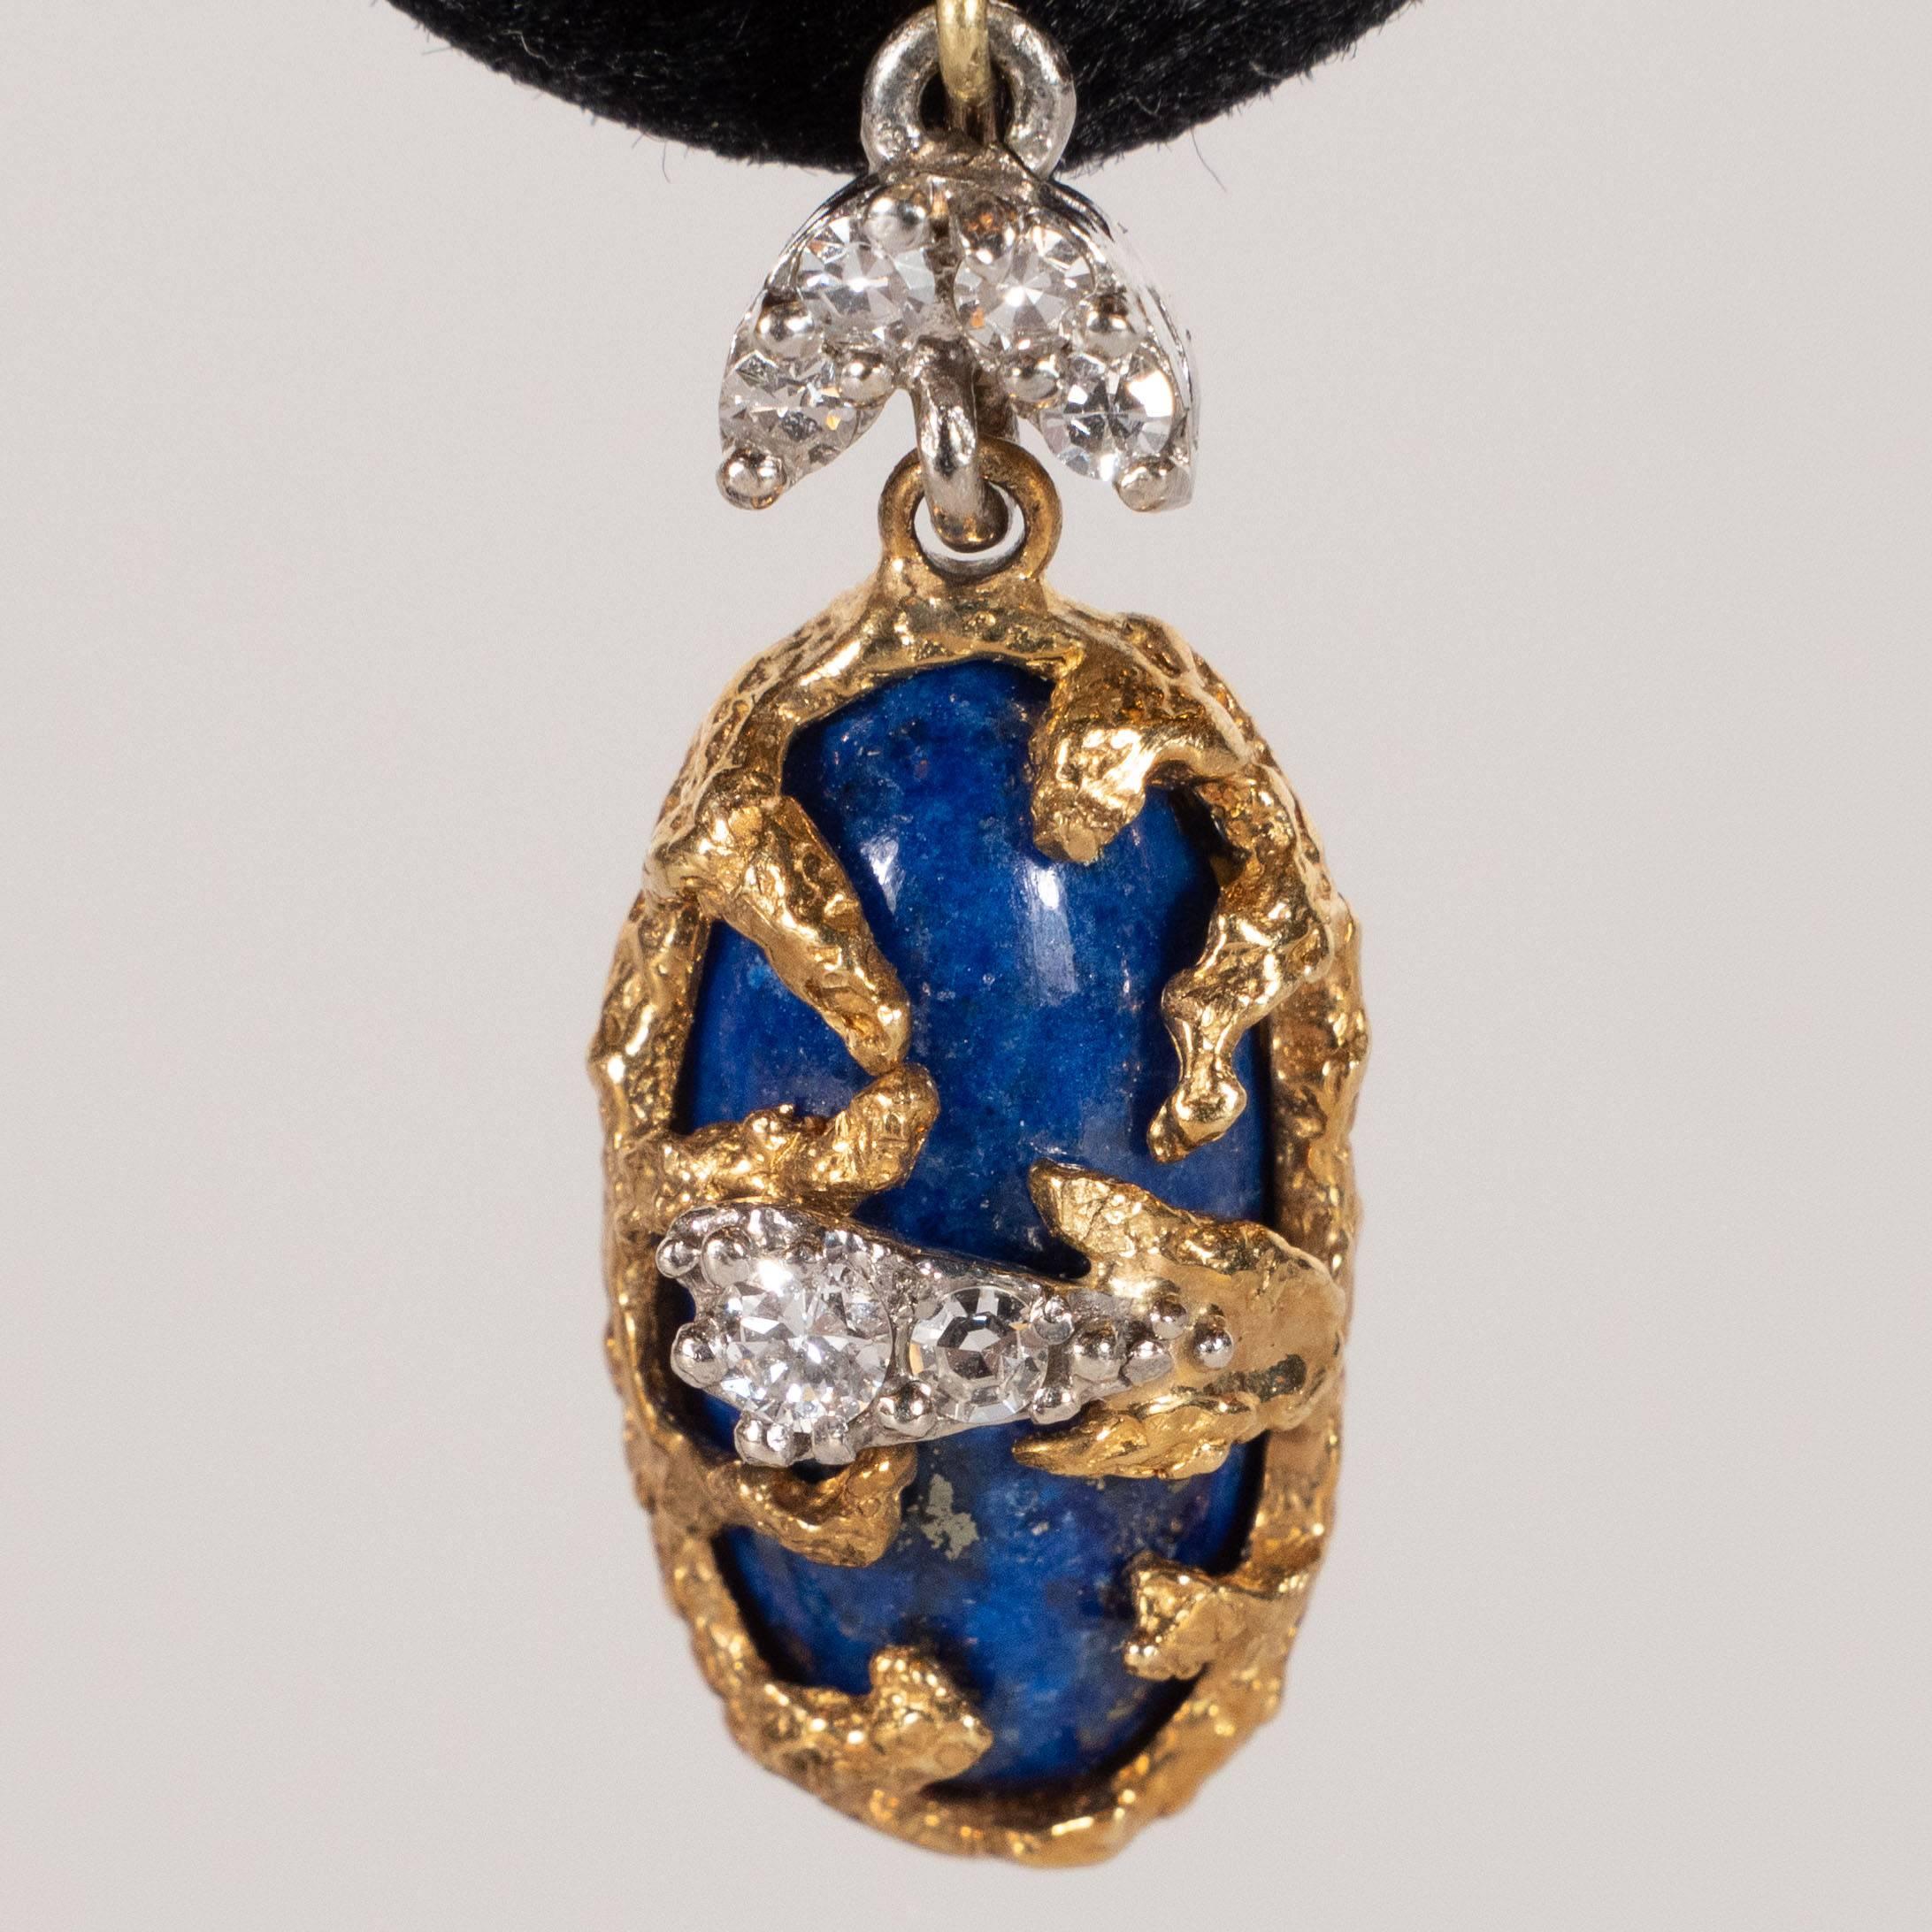 This stunning pair of earrings was hand crafted by the esteemed French jewelry atelier, La Triomphe, circa 1970. They feature oval forms of lapis lazuli circumscribed by textured 18k yellow gold resembling tendrils of elkhorn coral that ensconce the